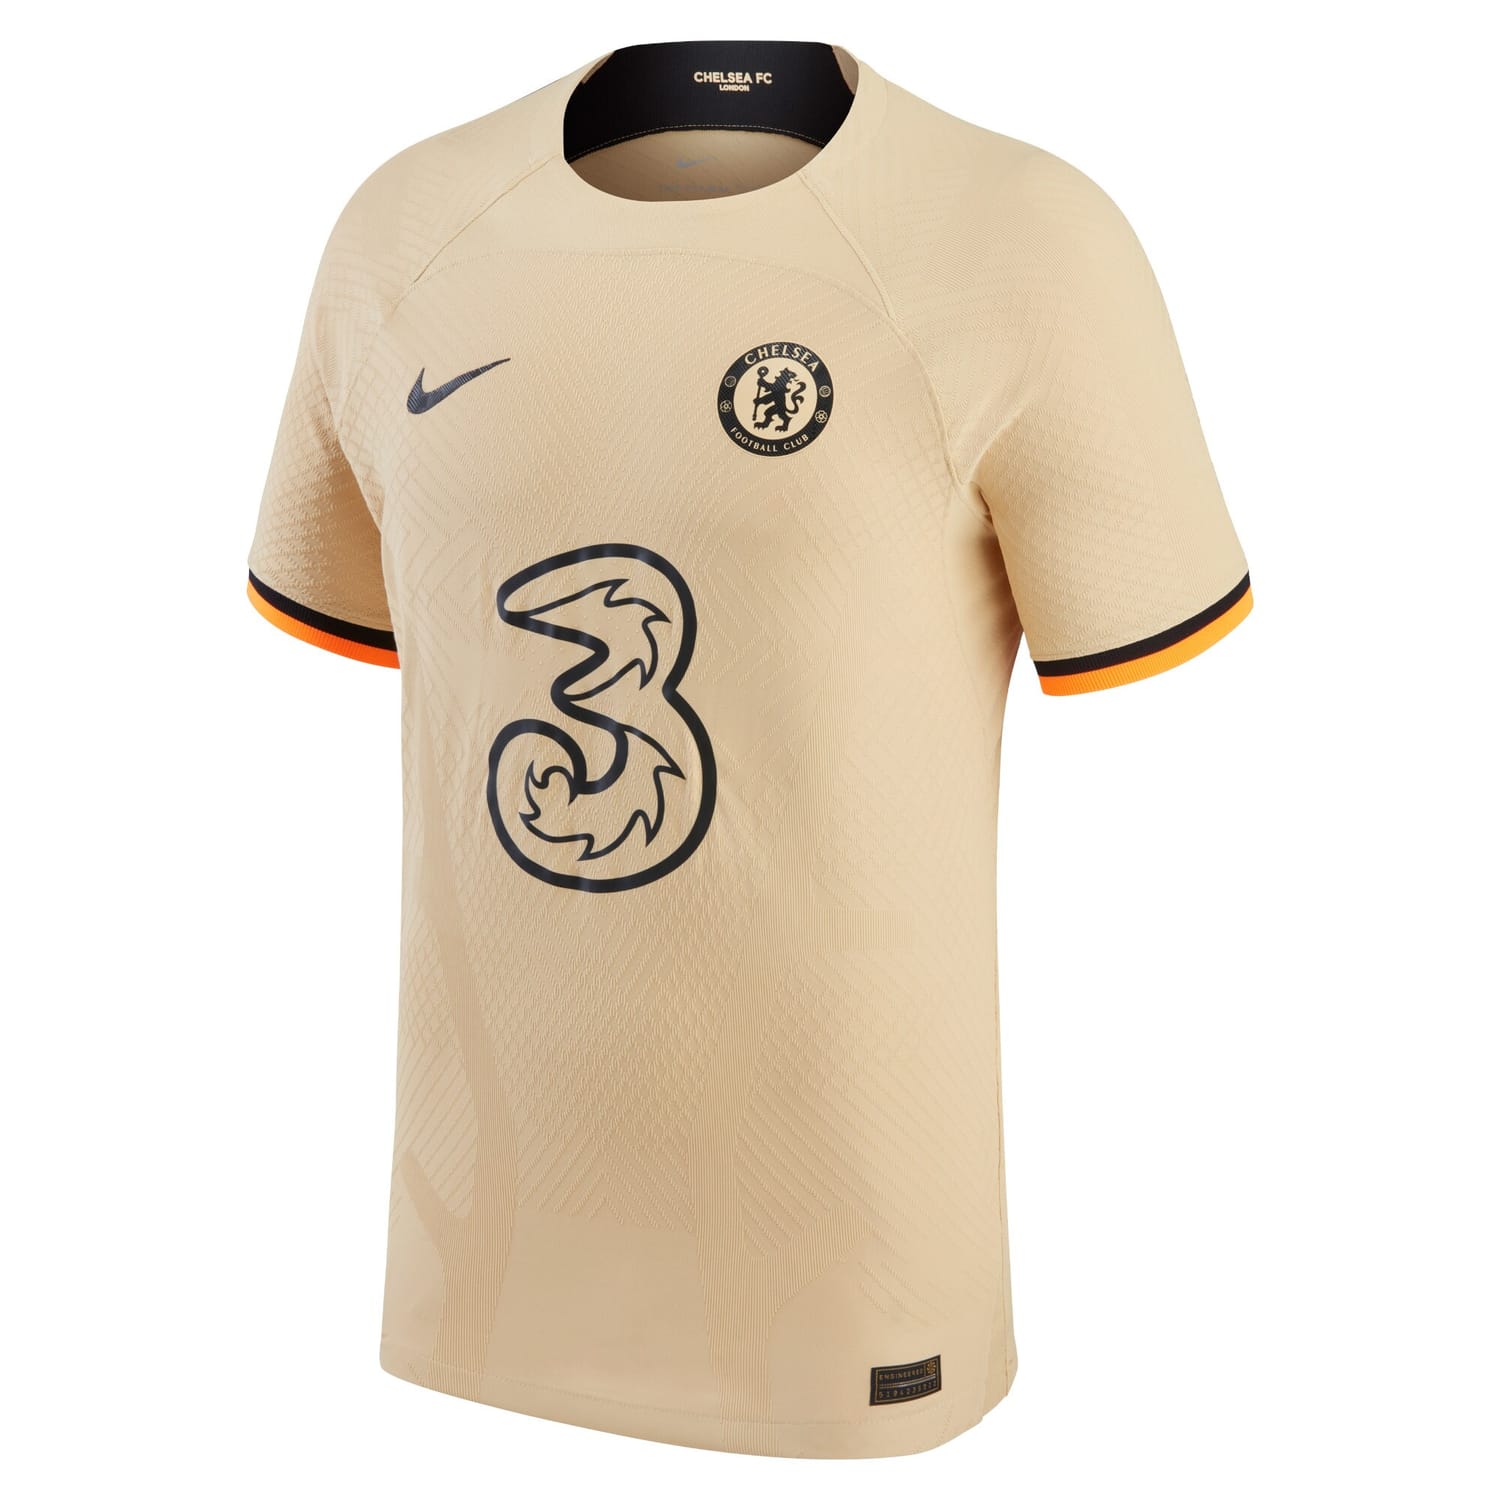 Premier League Chelsea Third Cup Authentic Jersey Shirt 2022-23 player Ben Chilwell 21 printing for Men